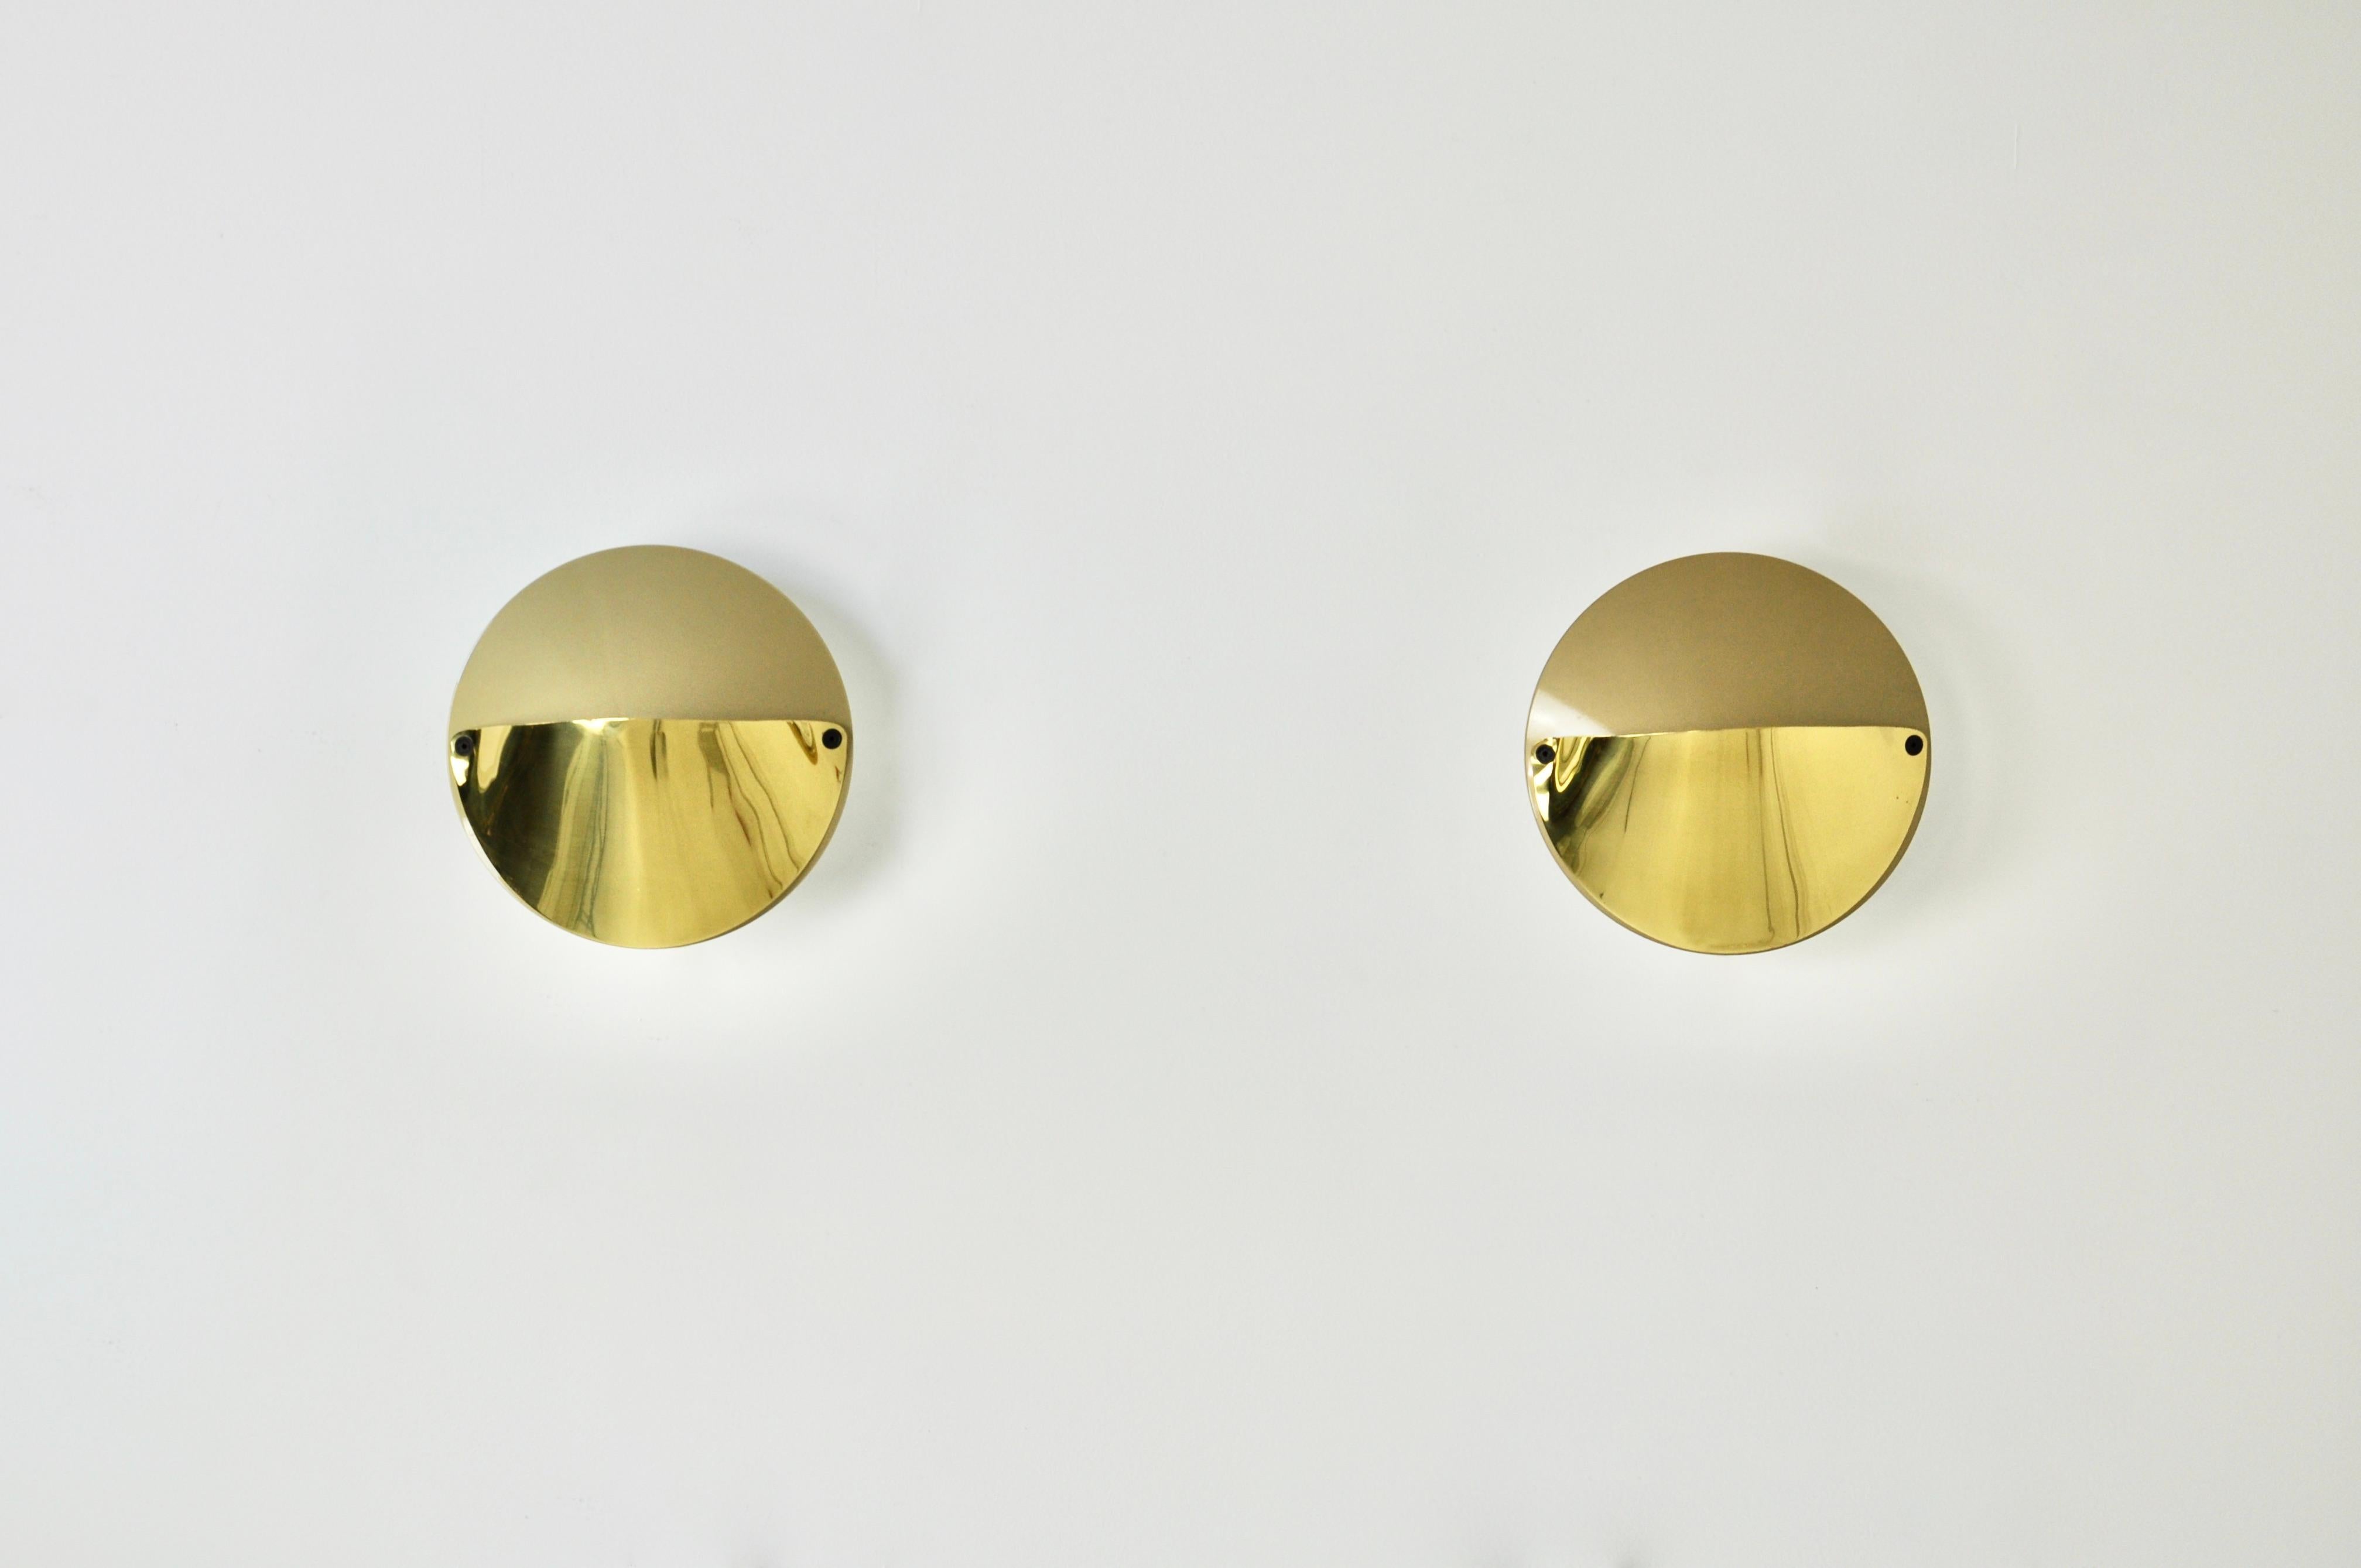 Pair of gold coloured metal sconces by Achille Castiglioni. Stamped Flos. Wear due to time and age of the sconces.